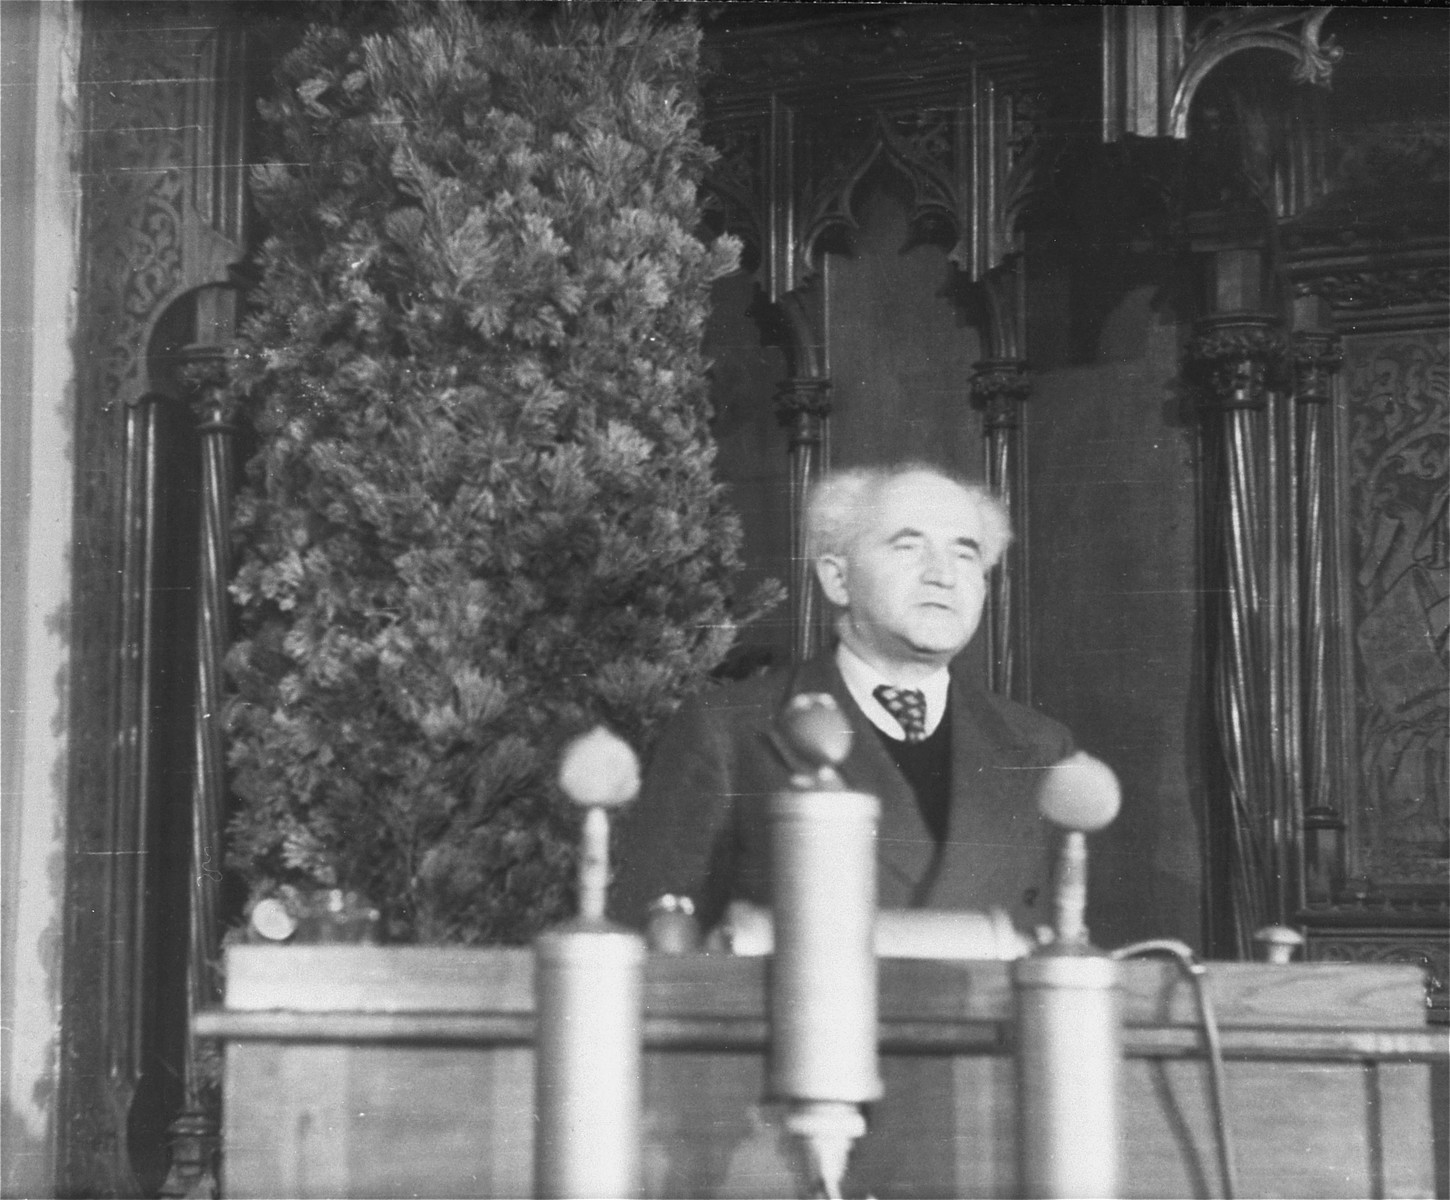 David Ben-Gurion addresses the Central Committee of Liberated Jews in the U.S. occupied zone at its first meeting in Munich.